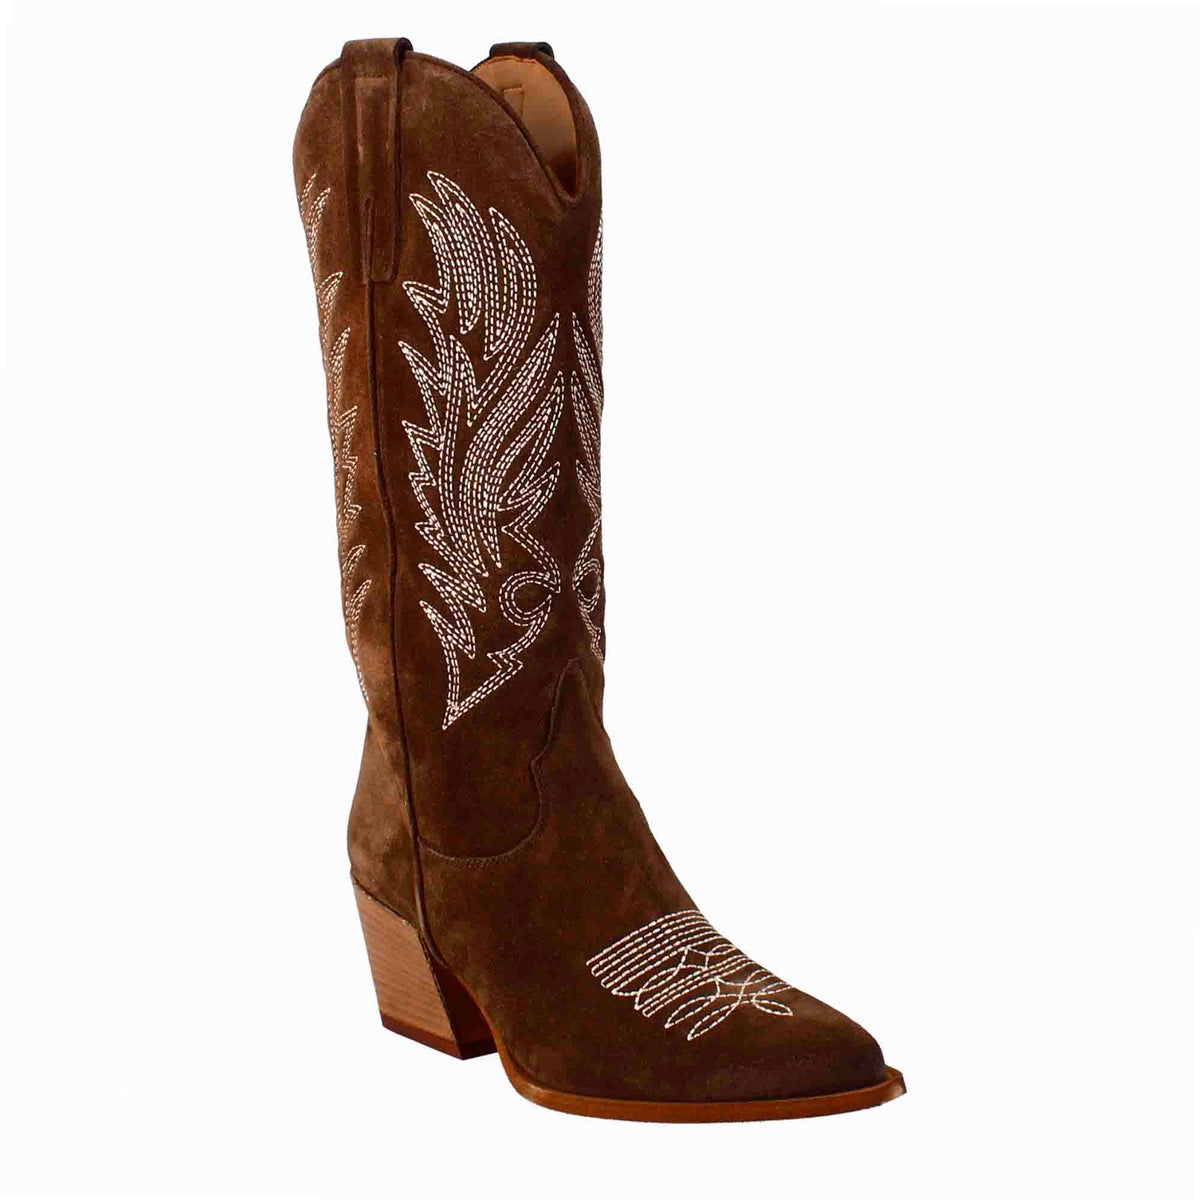 Women's Texan ankle boot in chocolate brown suede with embroidery